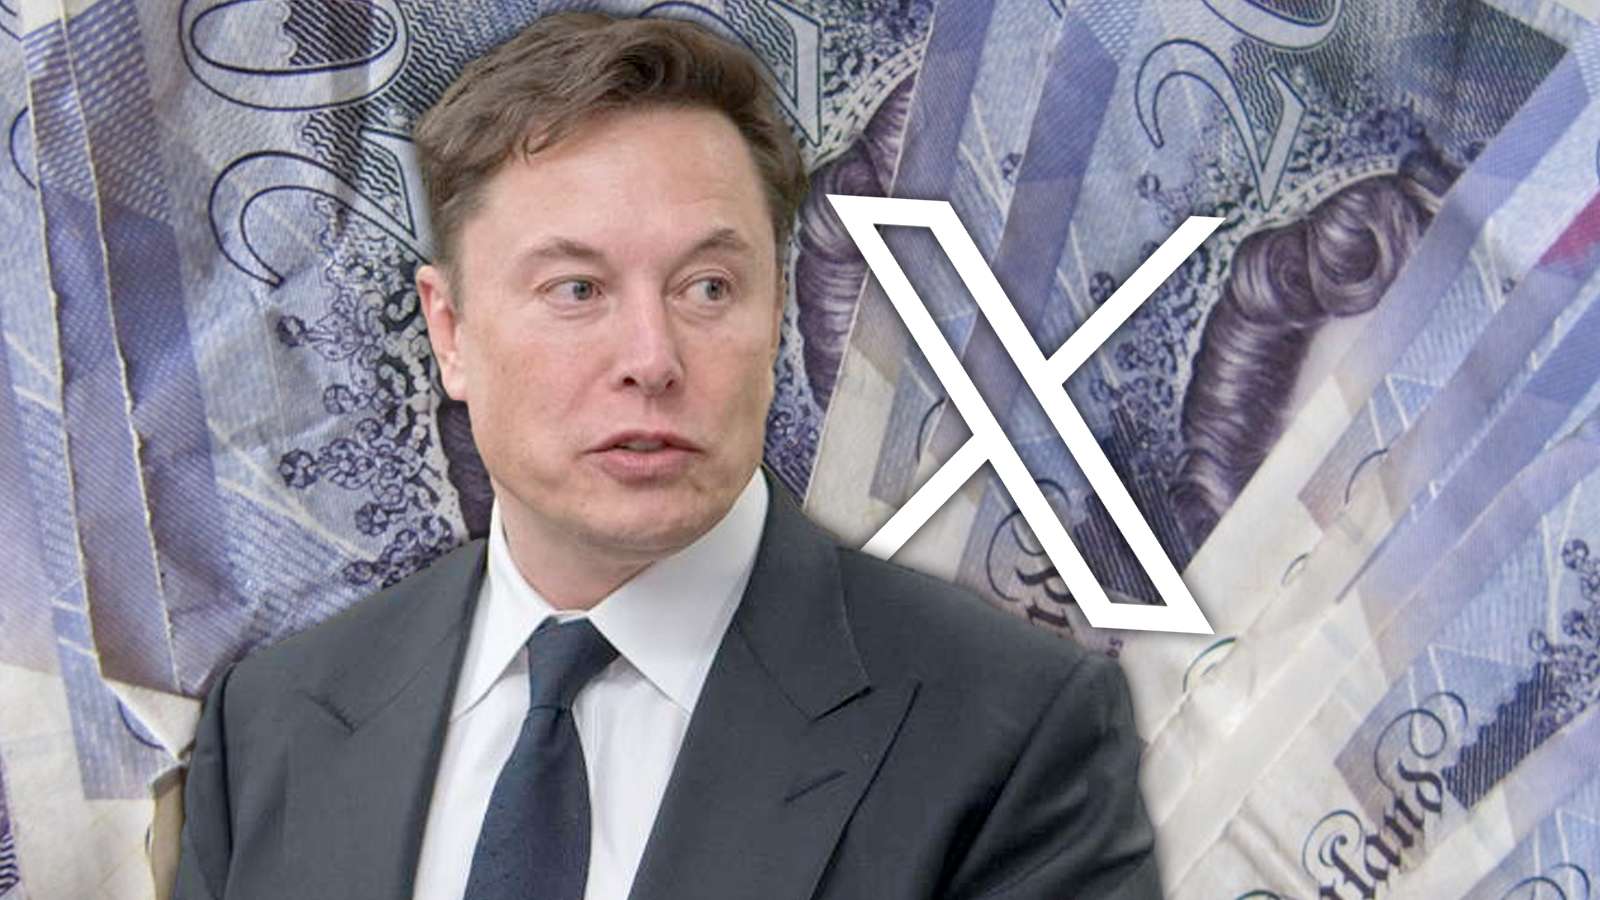 elon musk with cash behind him and the x logo